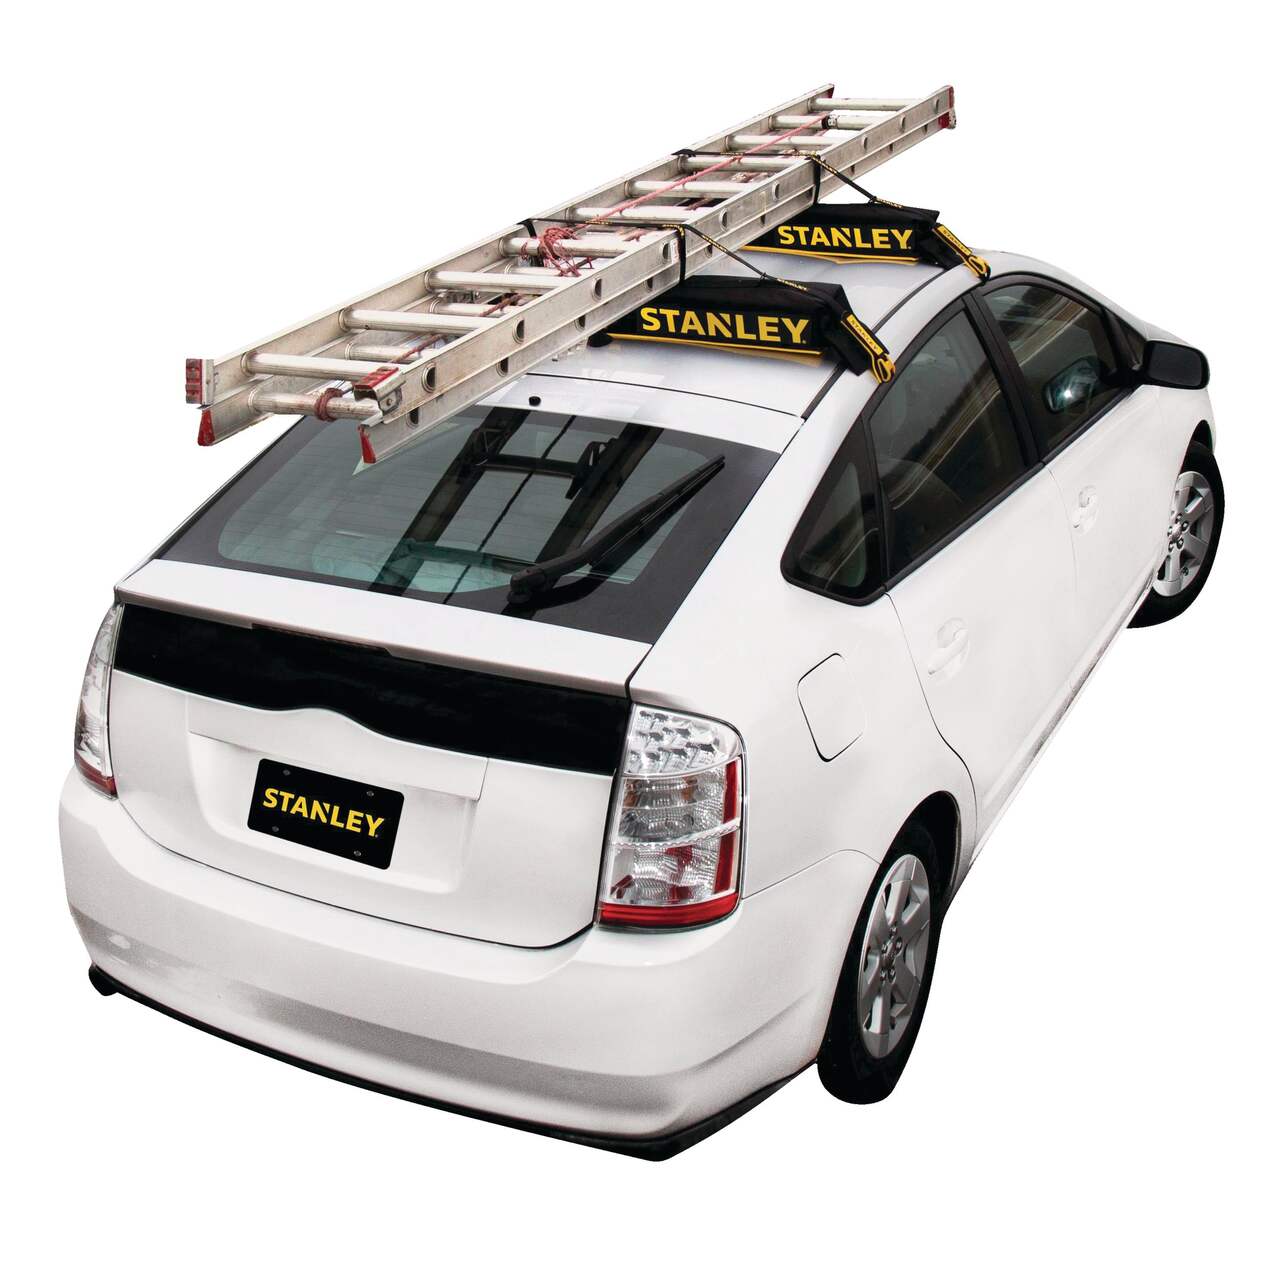 Stanley Roof Top Universal Rack Pad & Luggage Carrier System, Adjustable w/  2 Tie-Down Straps, Black